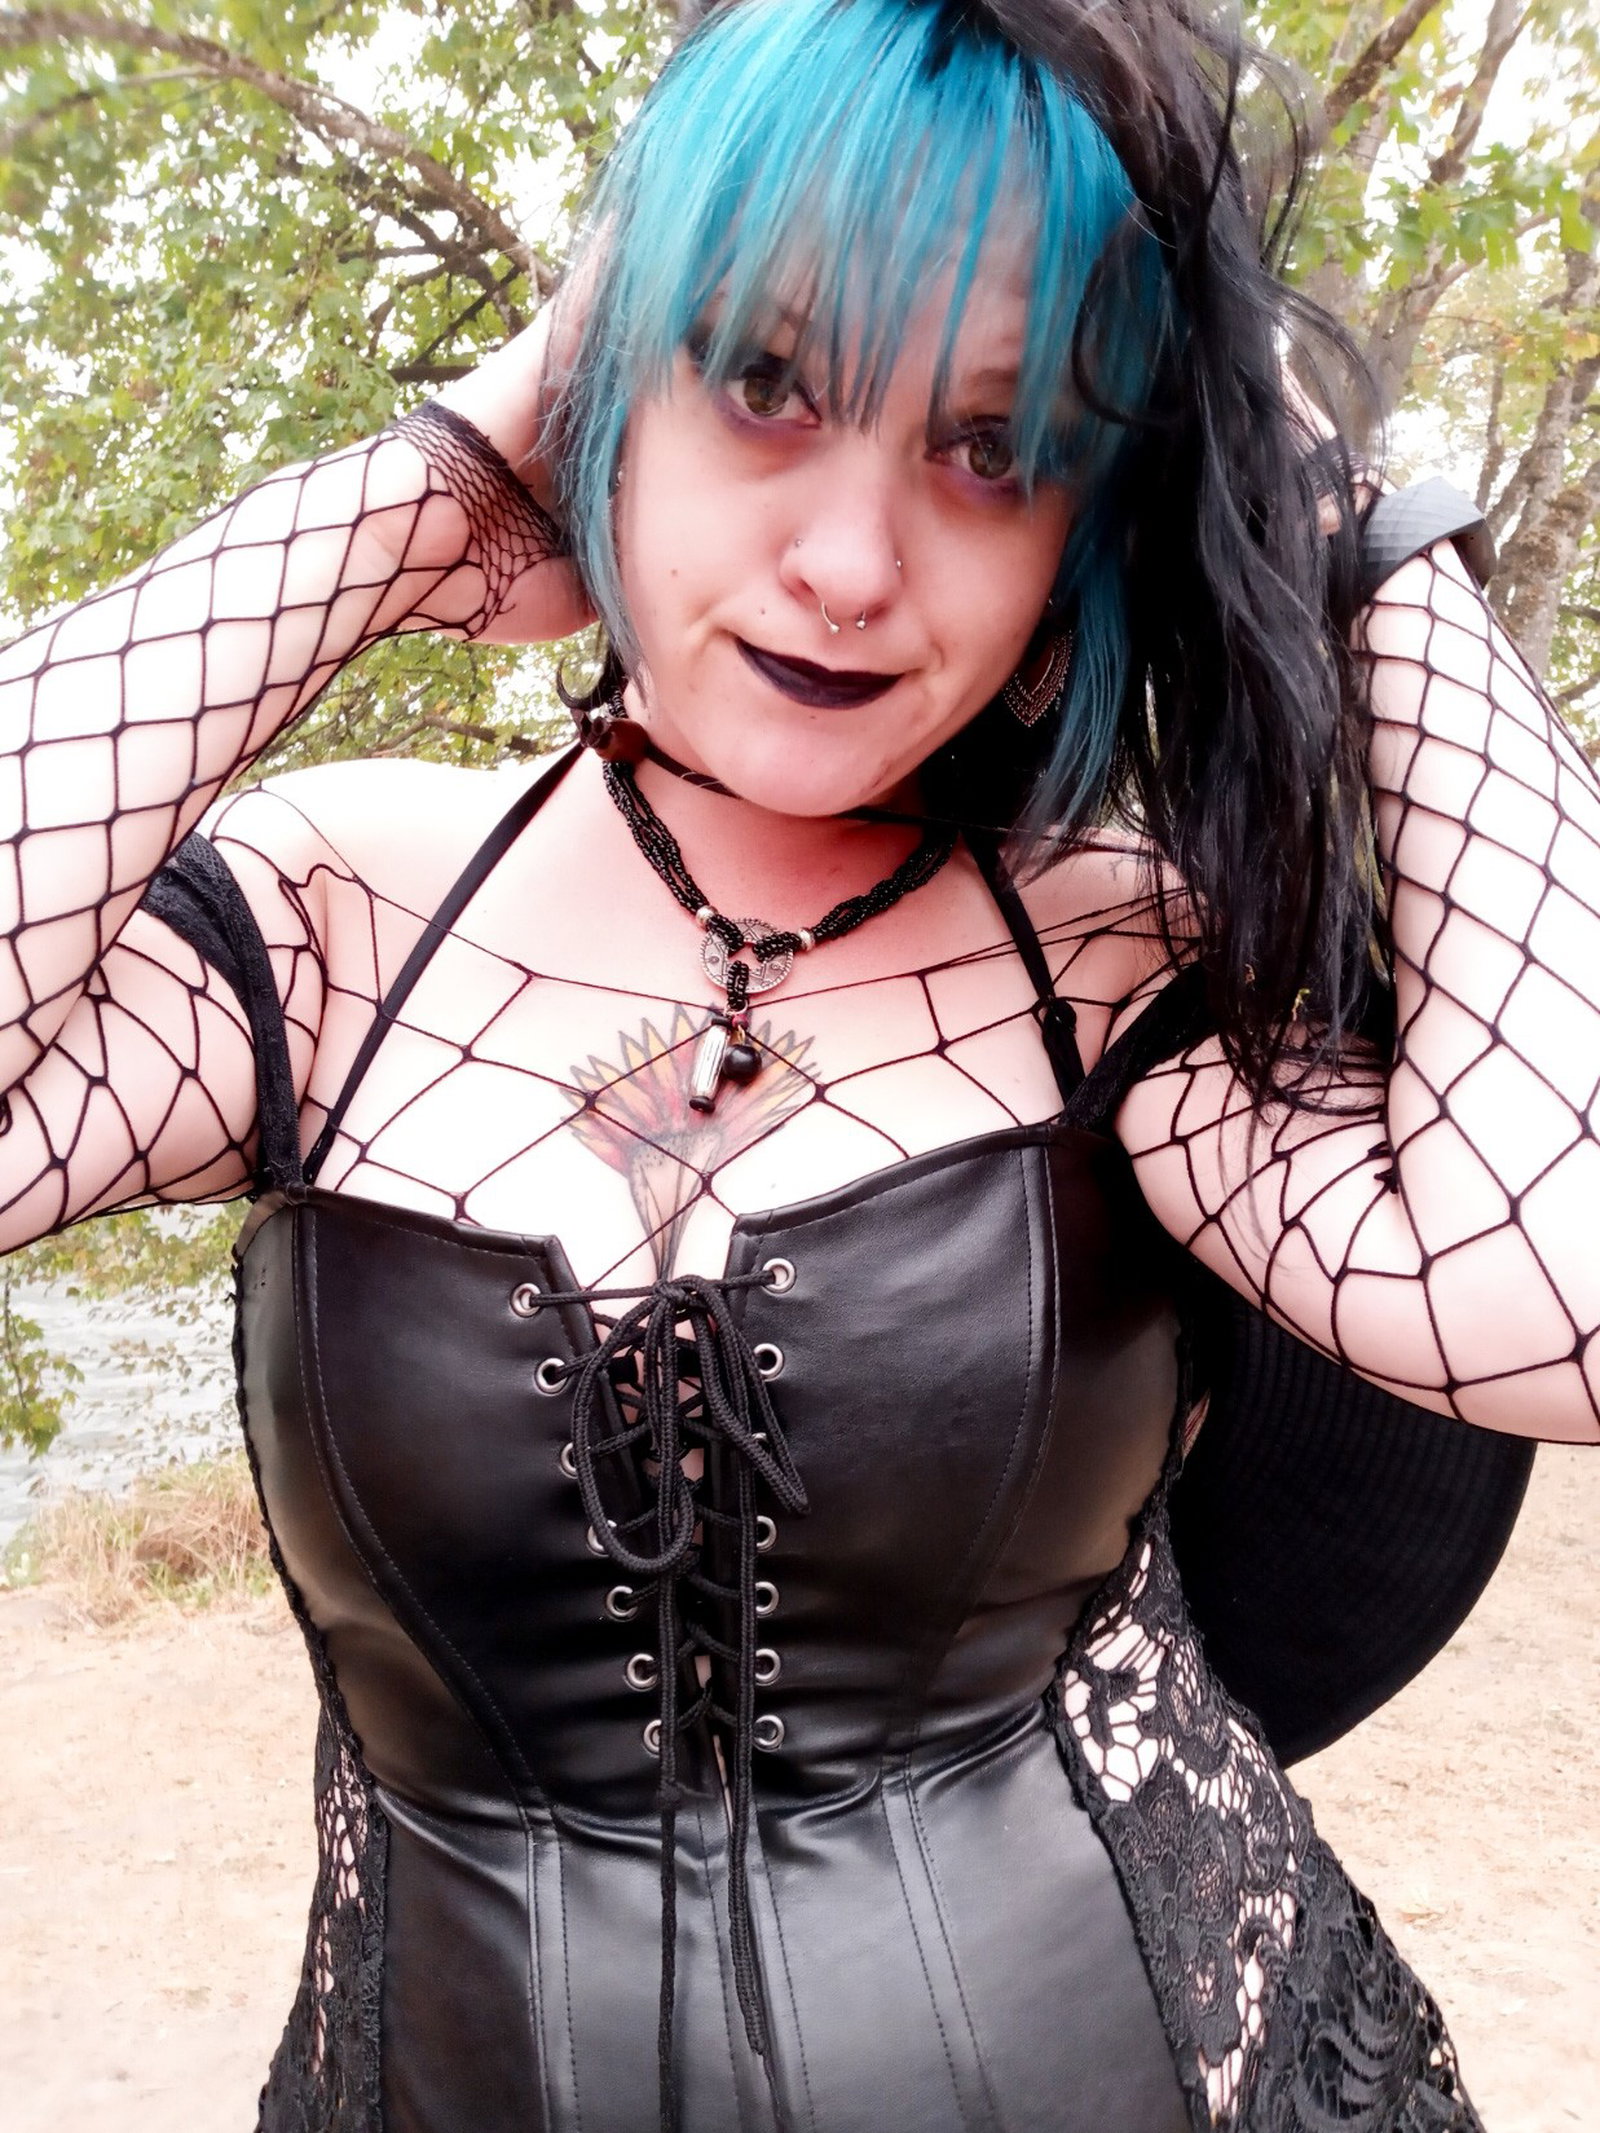 Photo by villainous vixen with the username @villainousvixen, who is a star user, posted on September 12, 2020 and the text says 'https://onlyfans.com/action/trial/m2q0mlmozav2udknszhgbsl0e3sfqcek

FREE DAY PASS to my ONLYFANS guys!! Come see all my new content and tell me to do!!'